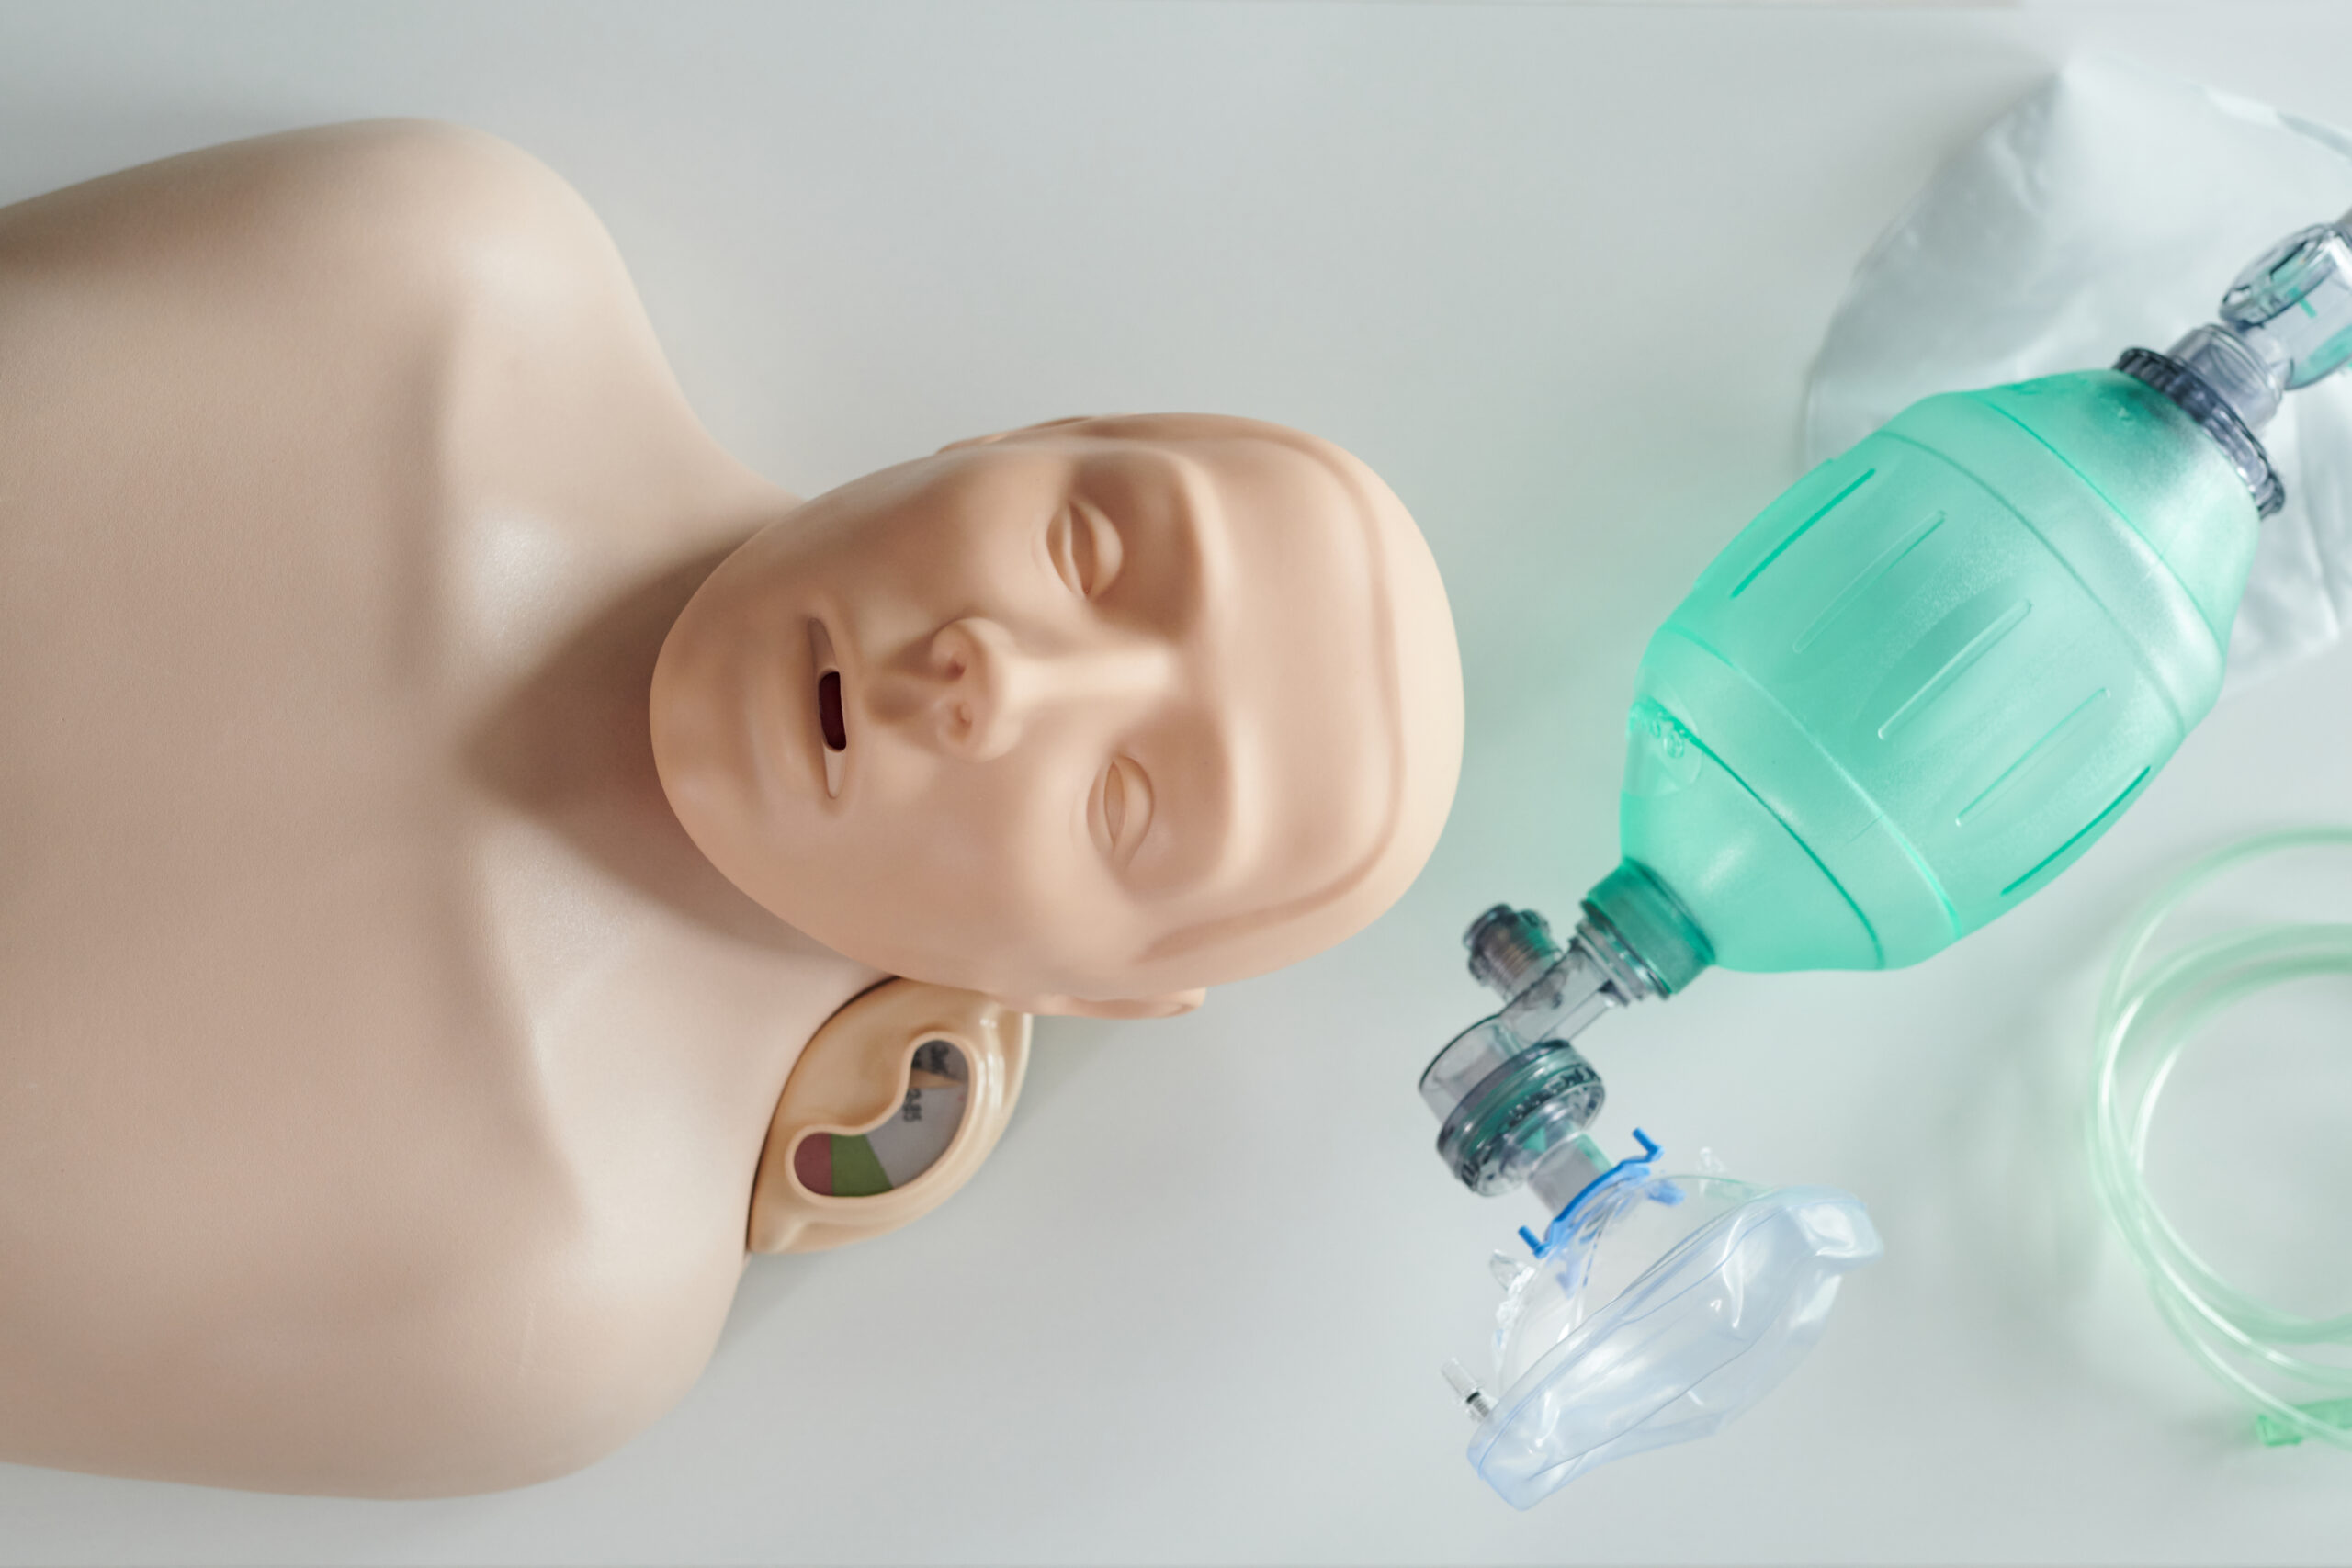 a mannikin laid out for CPR training